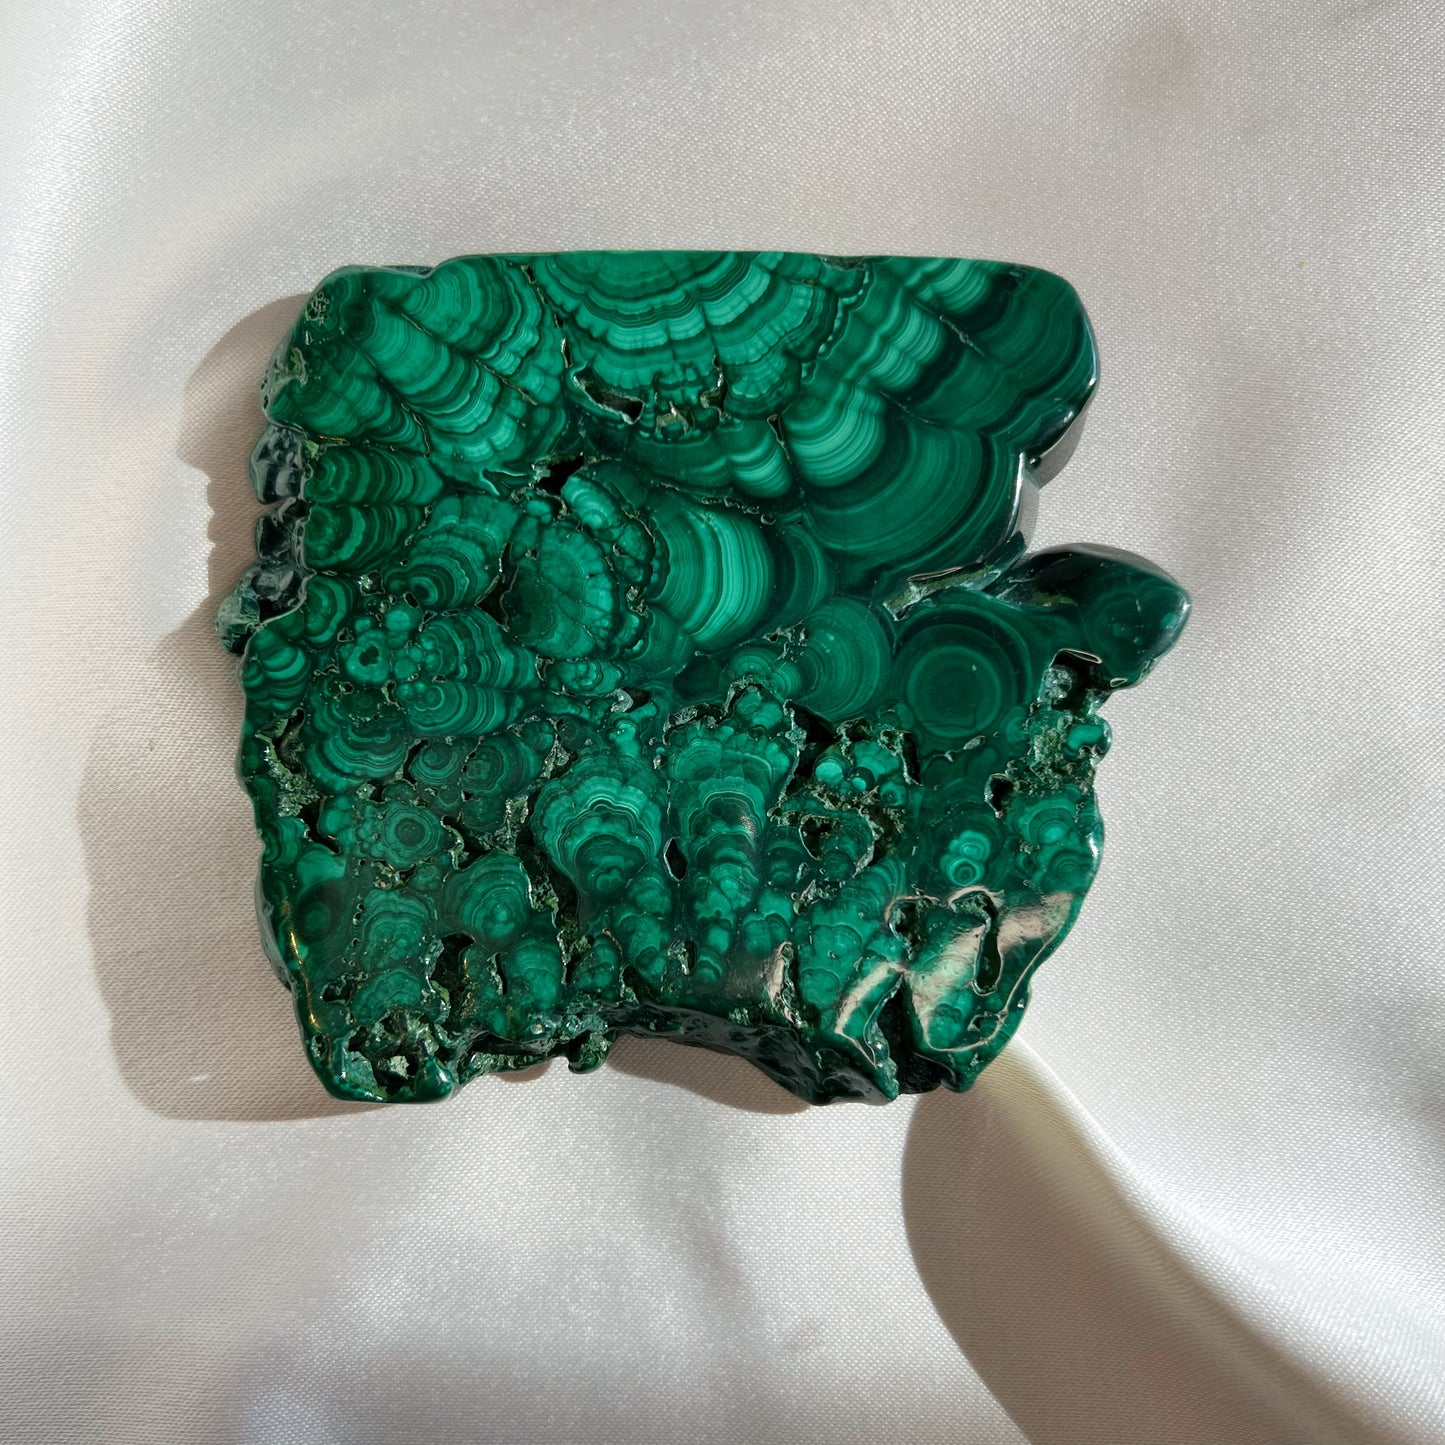 This listing is for one (1) Malachite Slab.  Known as the stone of transformation, Malachite helps bring energy and focus to new growth while pruning off the brambles holding you back. Malachite reminds us to turn over a new leaf. If you’re drawn to the vibrant Malachite crystal, it could mean that it’s time for a change.  Origin: Russia Slab 2:  3.5in by 3.15in, .185kg (shown in video)